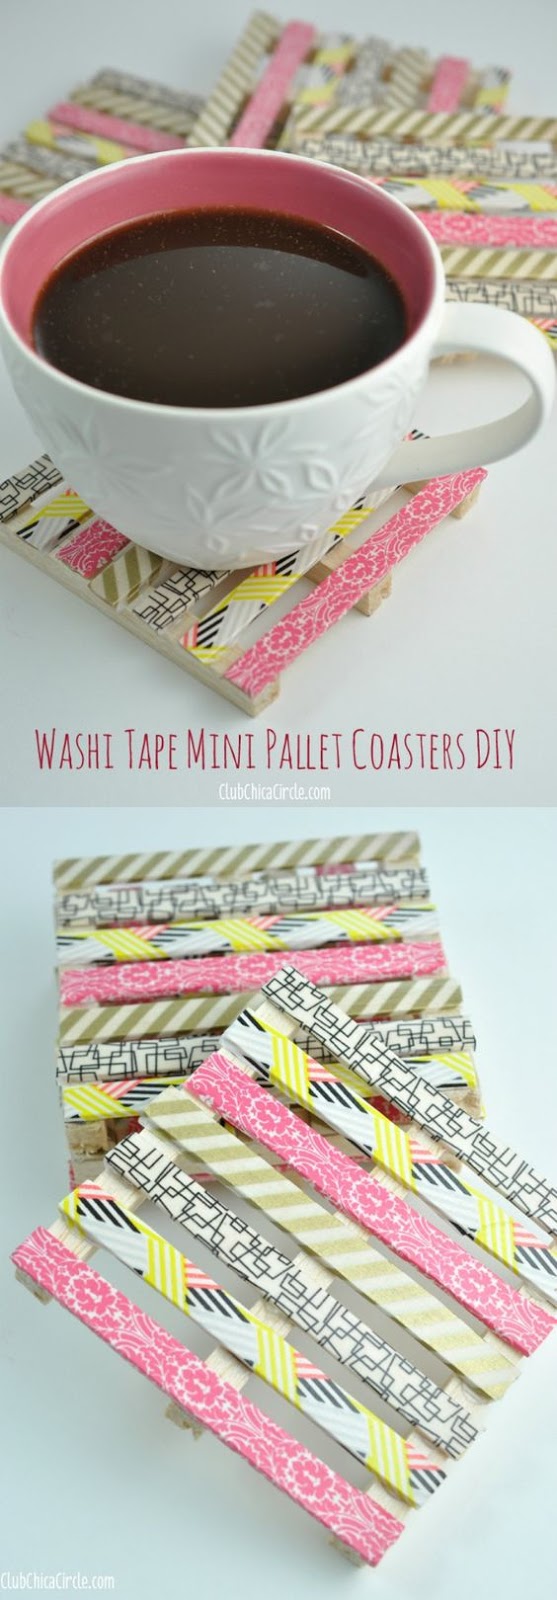 20 Best Washi Tape Ideas That Would Keep You Up All Night